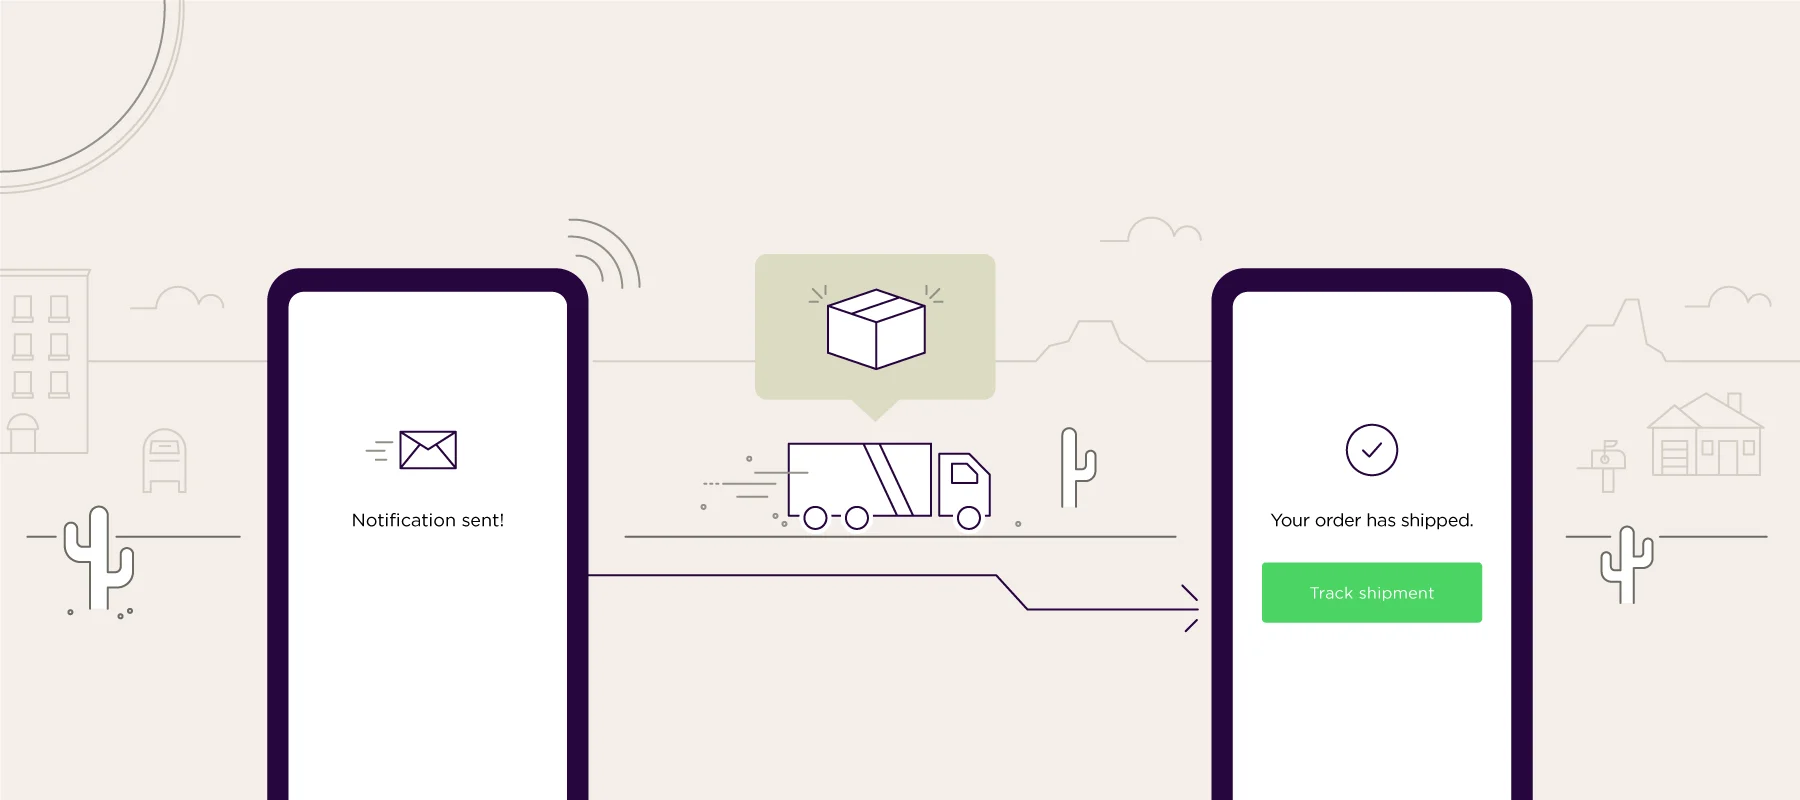 Use Your Shop to Send Shipment Notifications